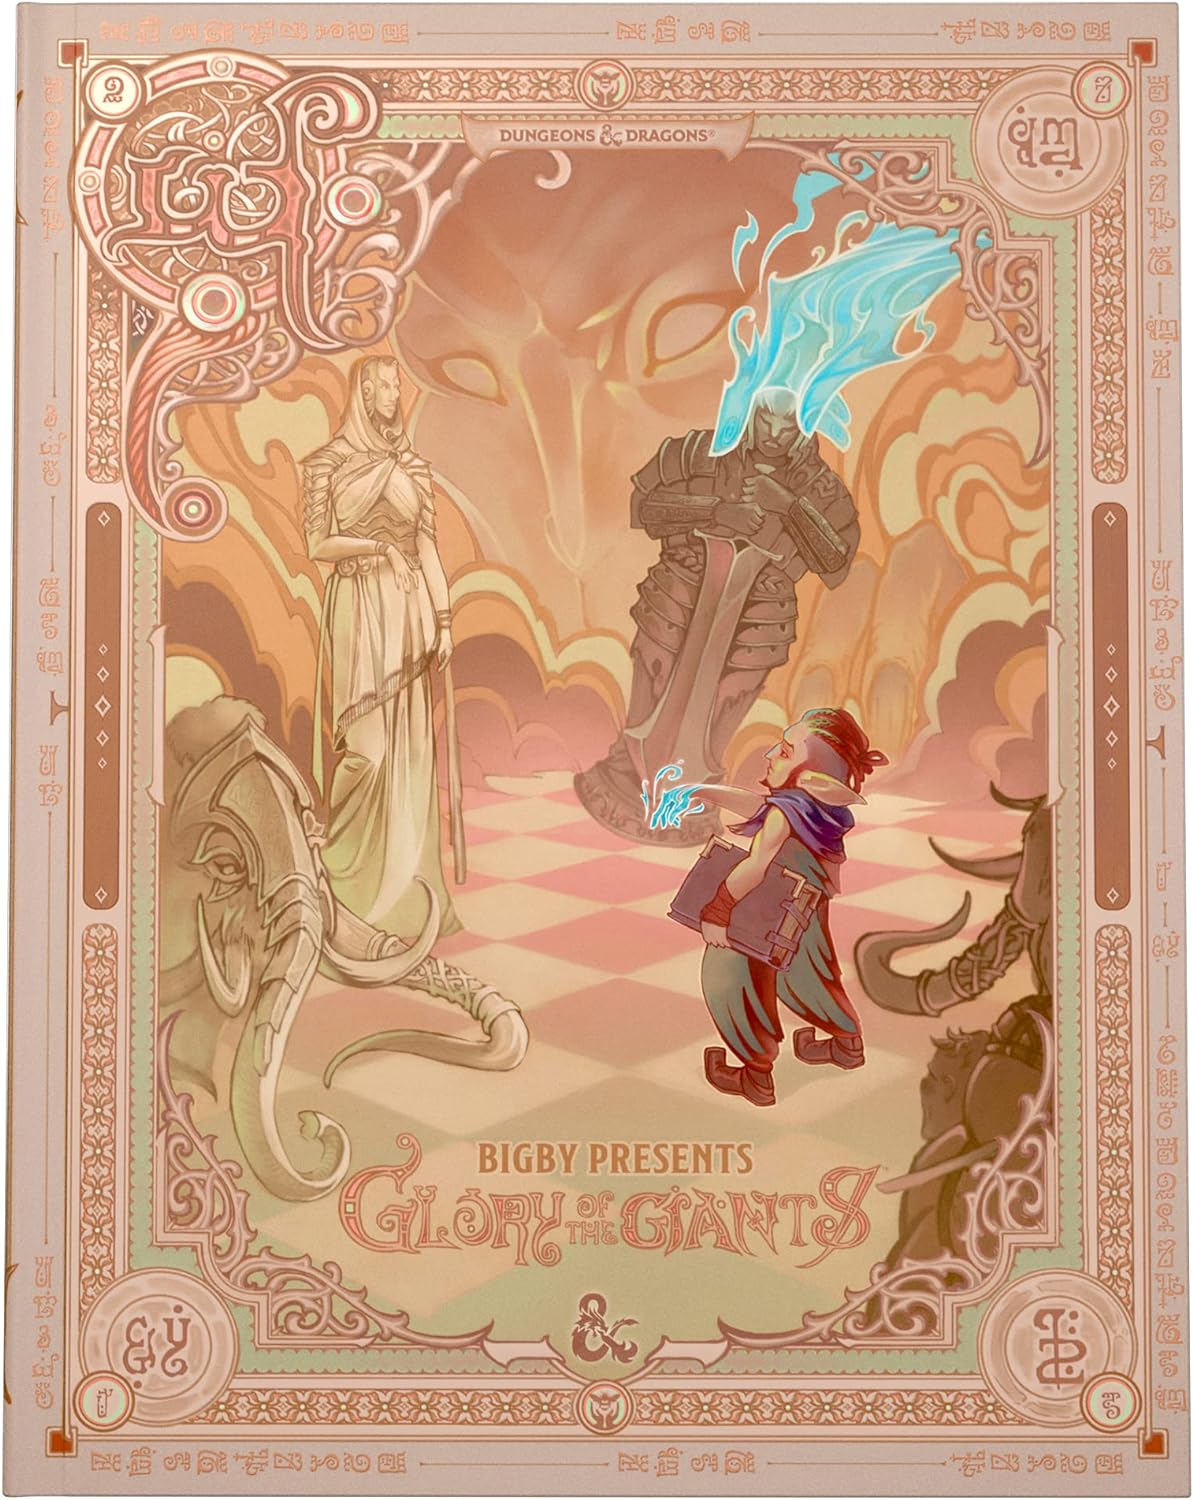 Dungeons & Dragons: Glory of the Giants Alternative Cover